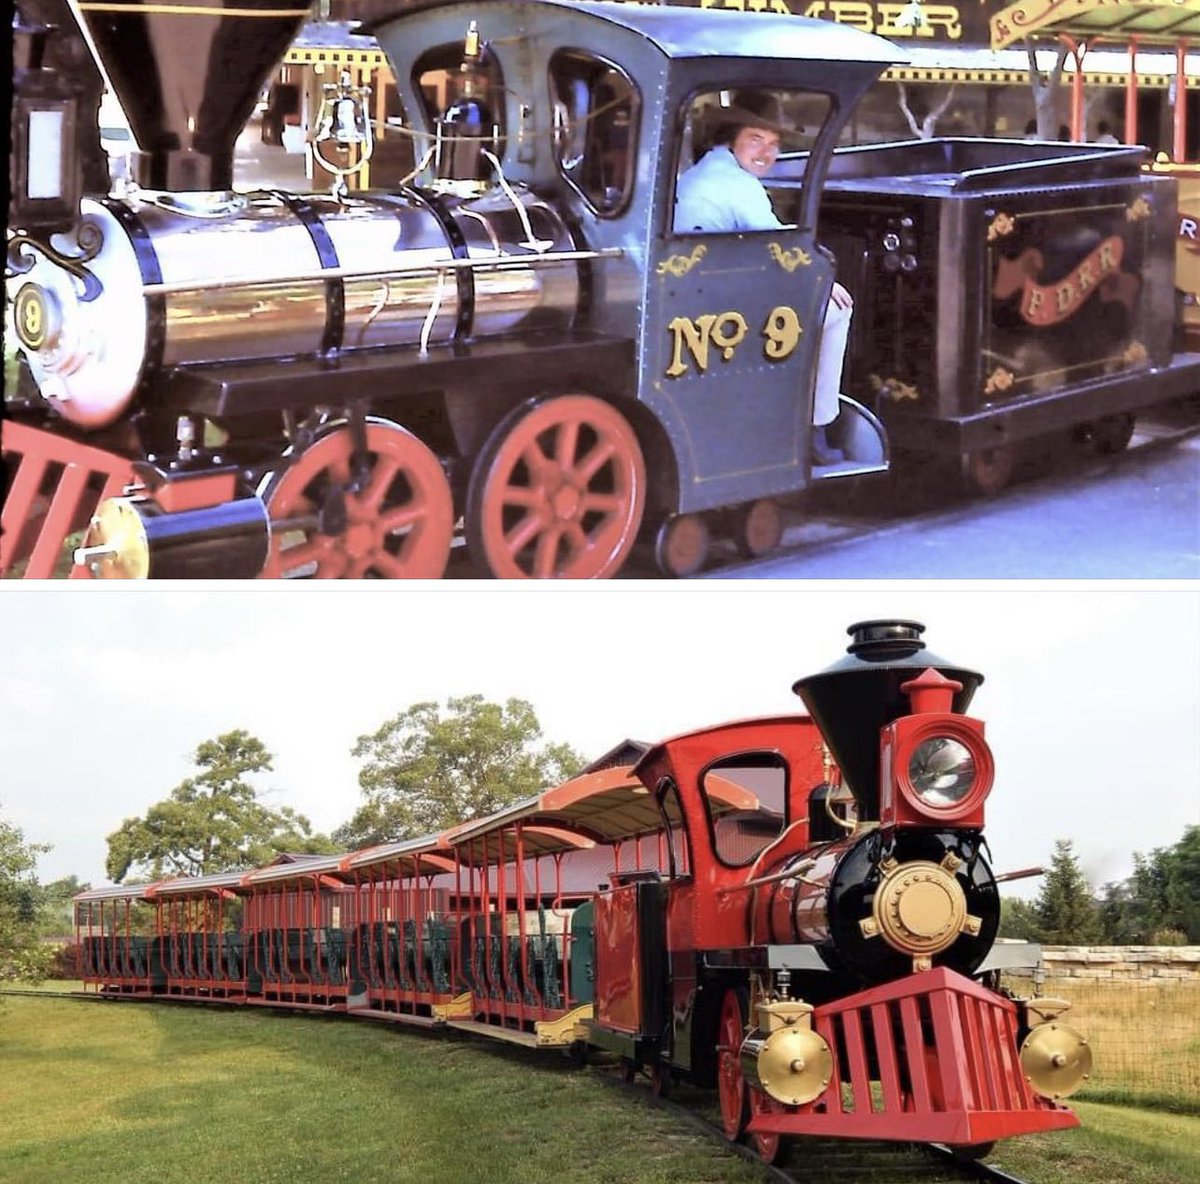 Old #9 still brings the smiles & creates the memories in Wisconsin Dells. For over 50 years, the train has carried families through Dells fun. We are so proud to be part of the history with our Safari Train ride. Purchase a ticket for Old #9 during your next visit 9a-5p